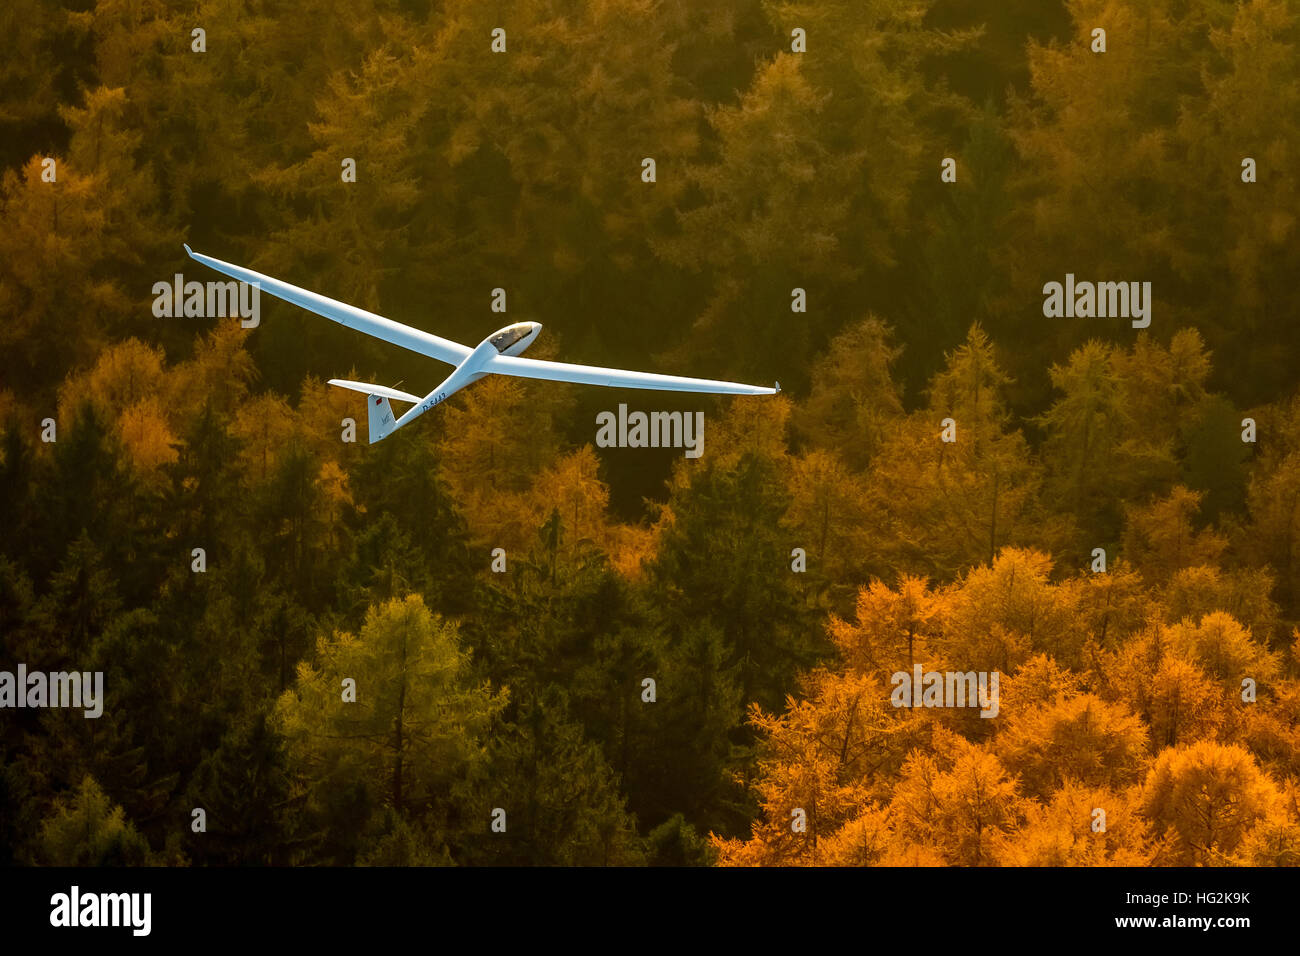 Aerial view, Duo Discus D-5443 from the LSC Oeventrop e.V. over the autumnal forests of Oeventrop, Stock Photo